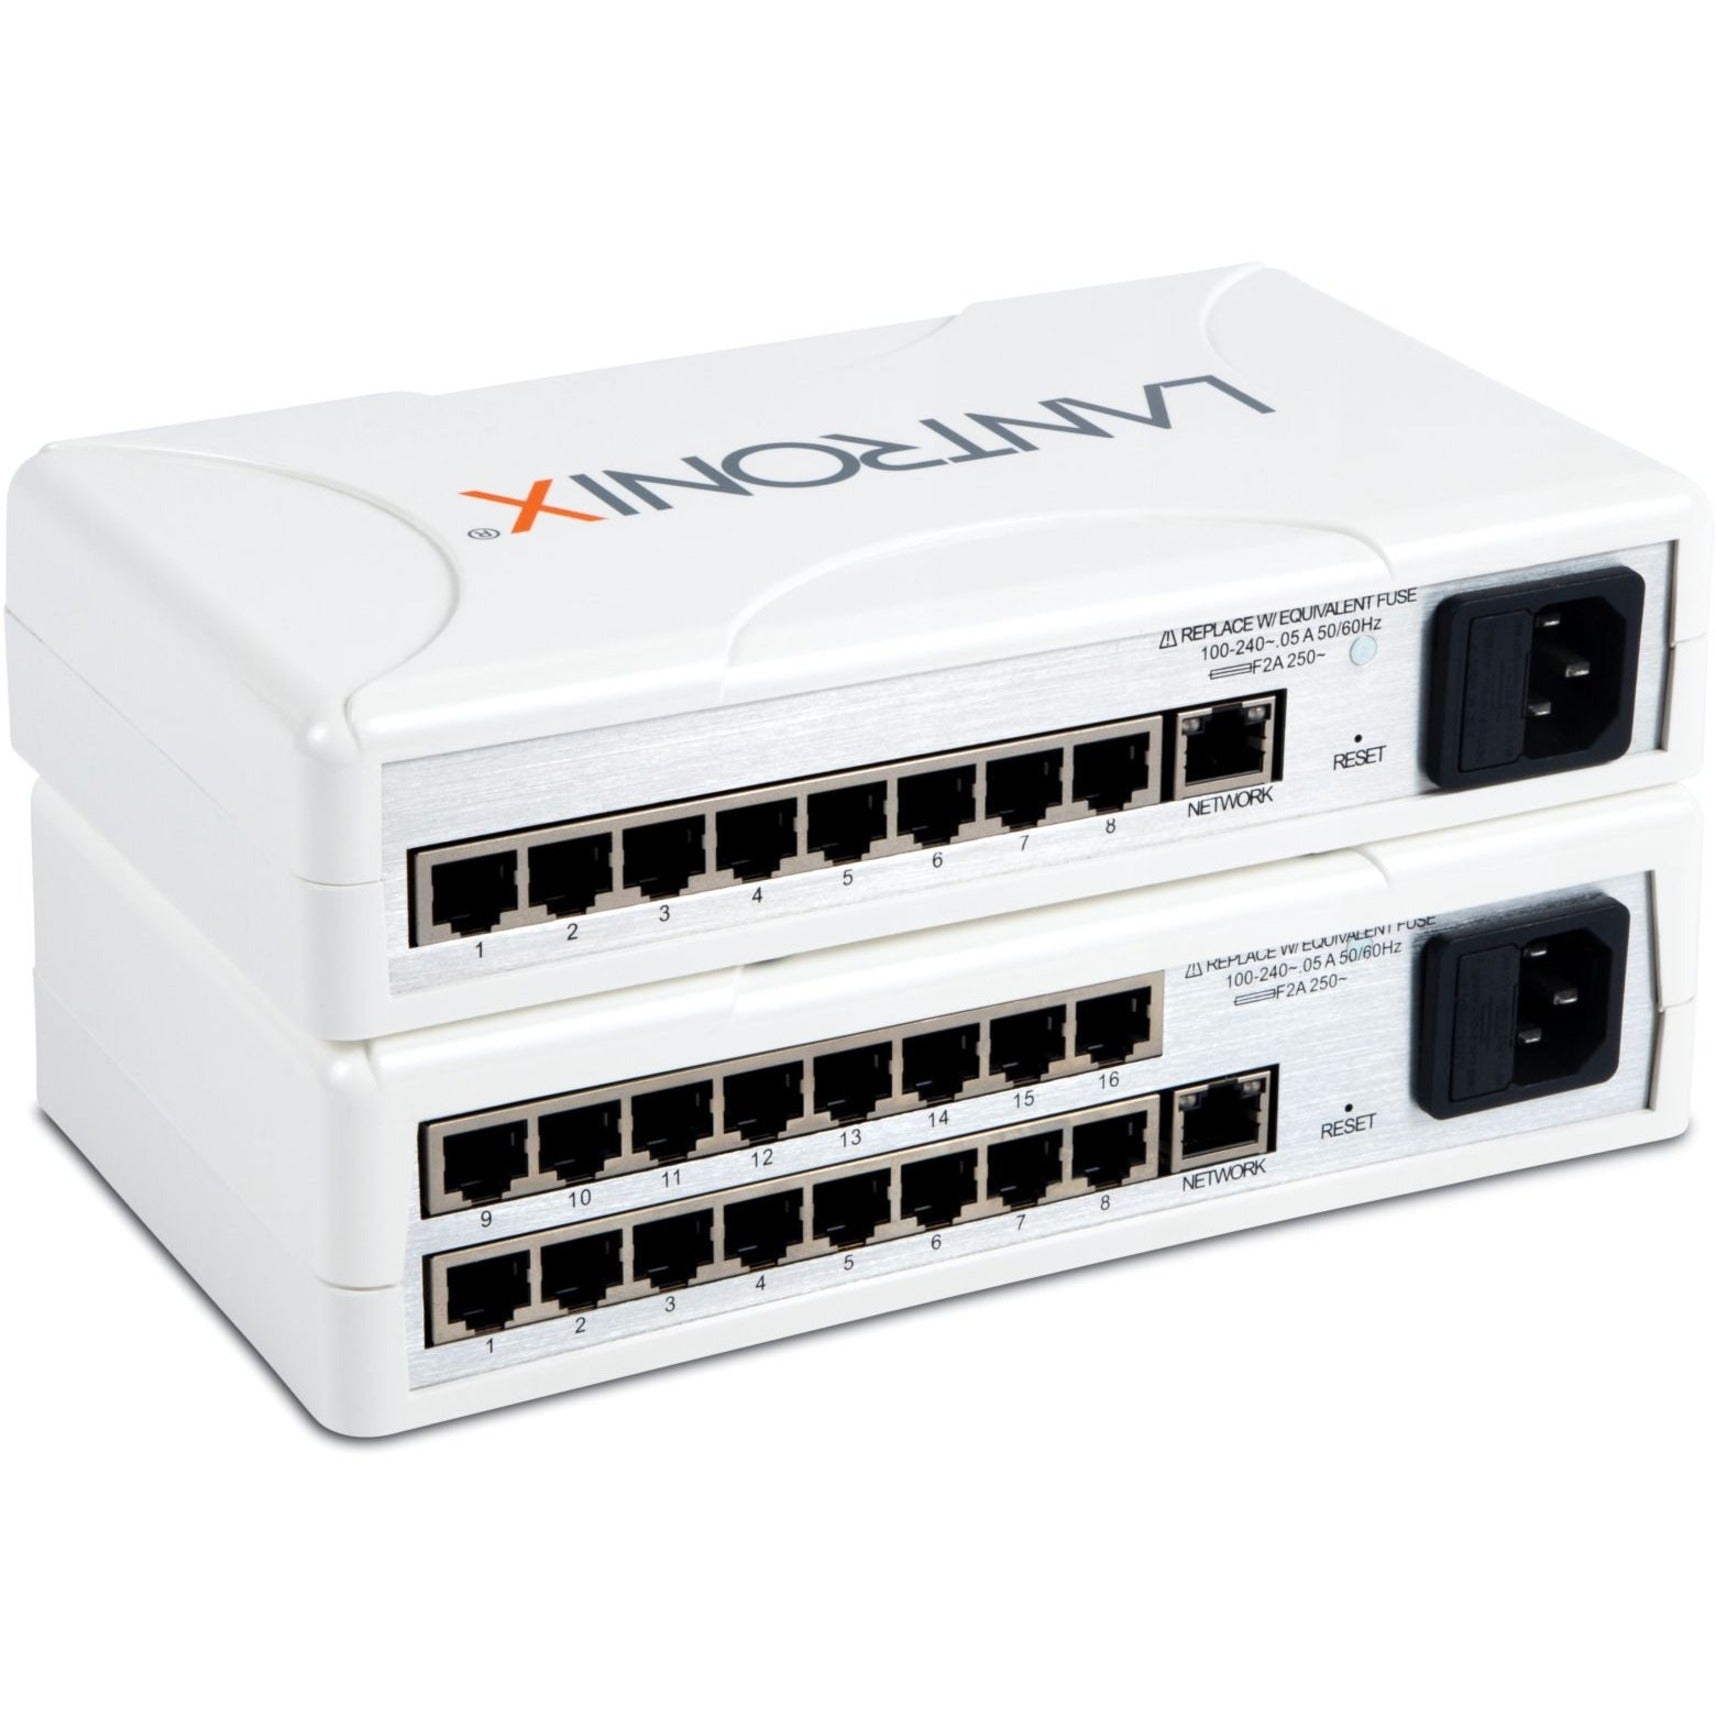 Lantronix EDS3016PS1NS EDS EDS3016PS Device Server, 16 Serial Ports, Gigabit Ethernet, 512MB Memory, 2 Year Warranty